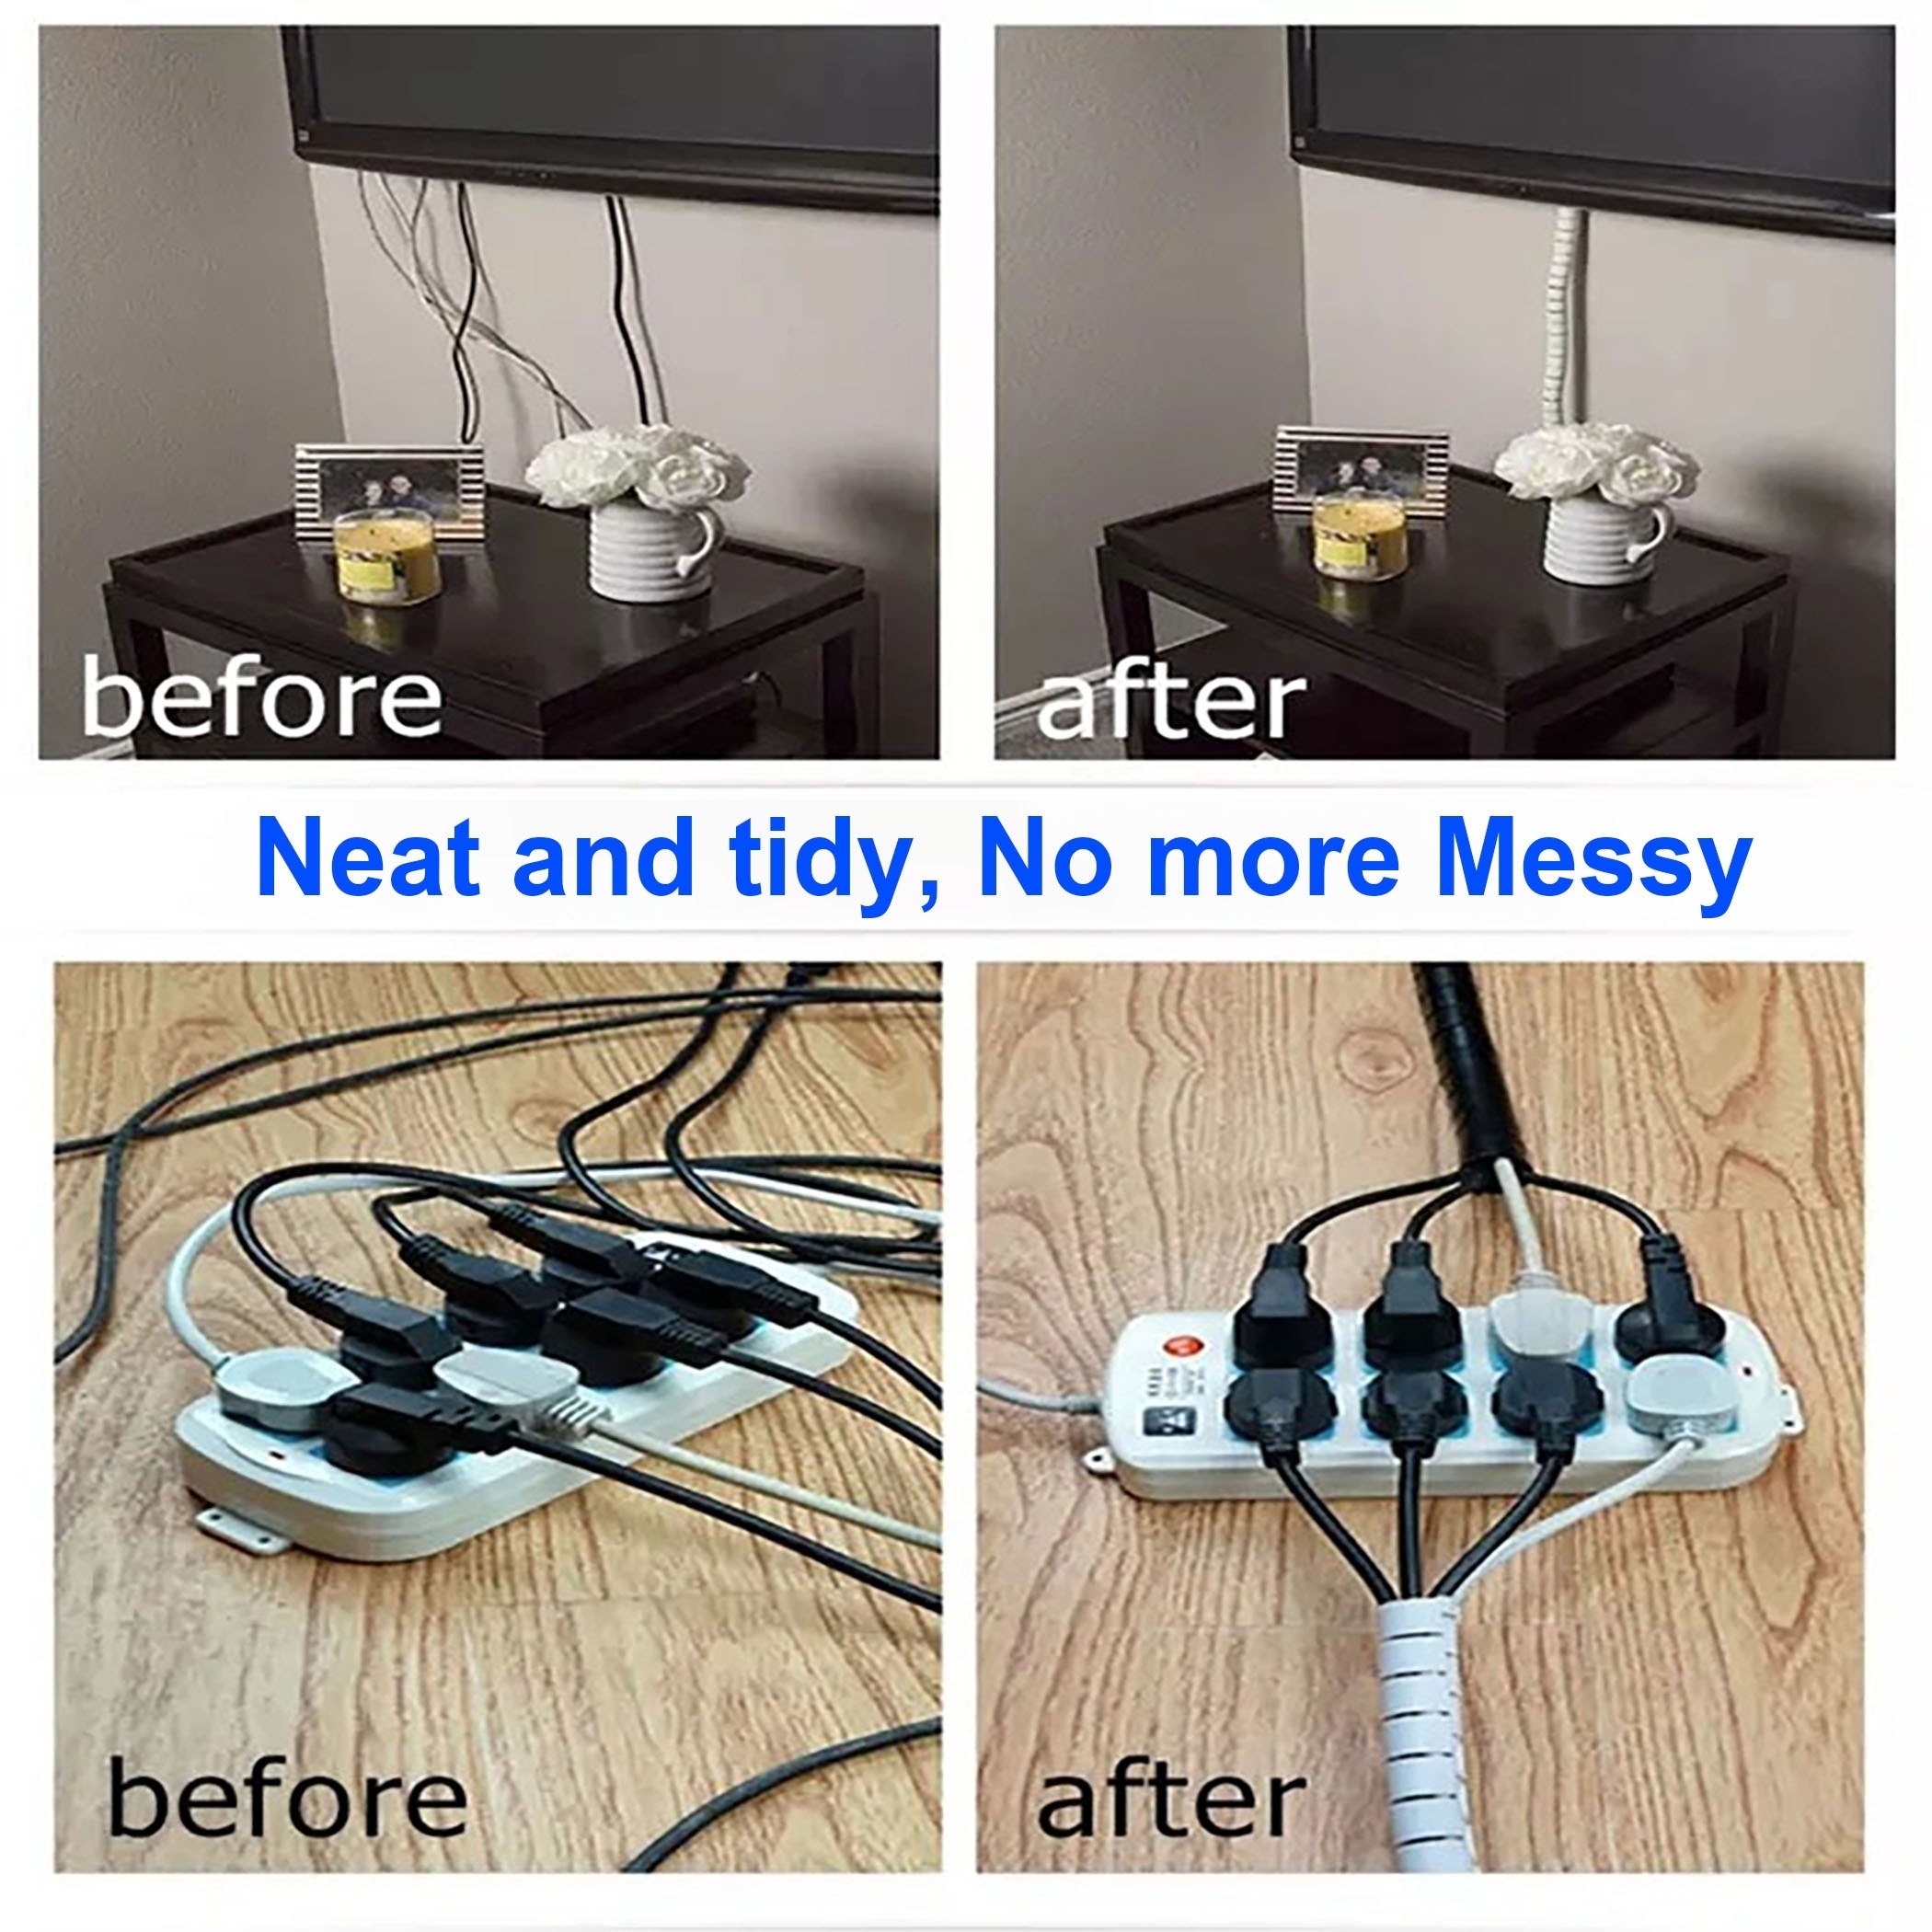 HOW TO Manage Messy Cables With A Flexible Cable Organizer Tube